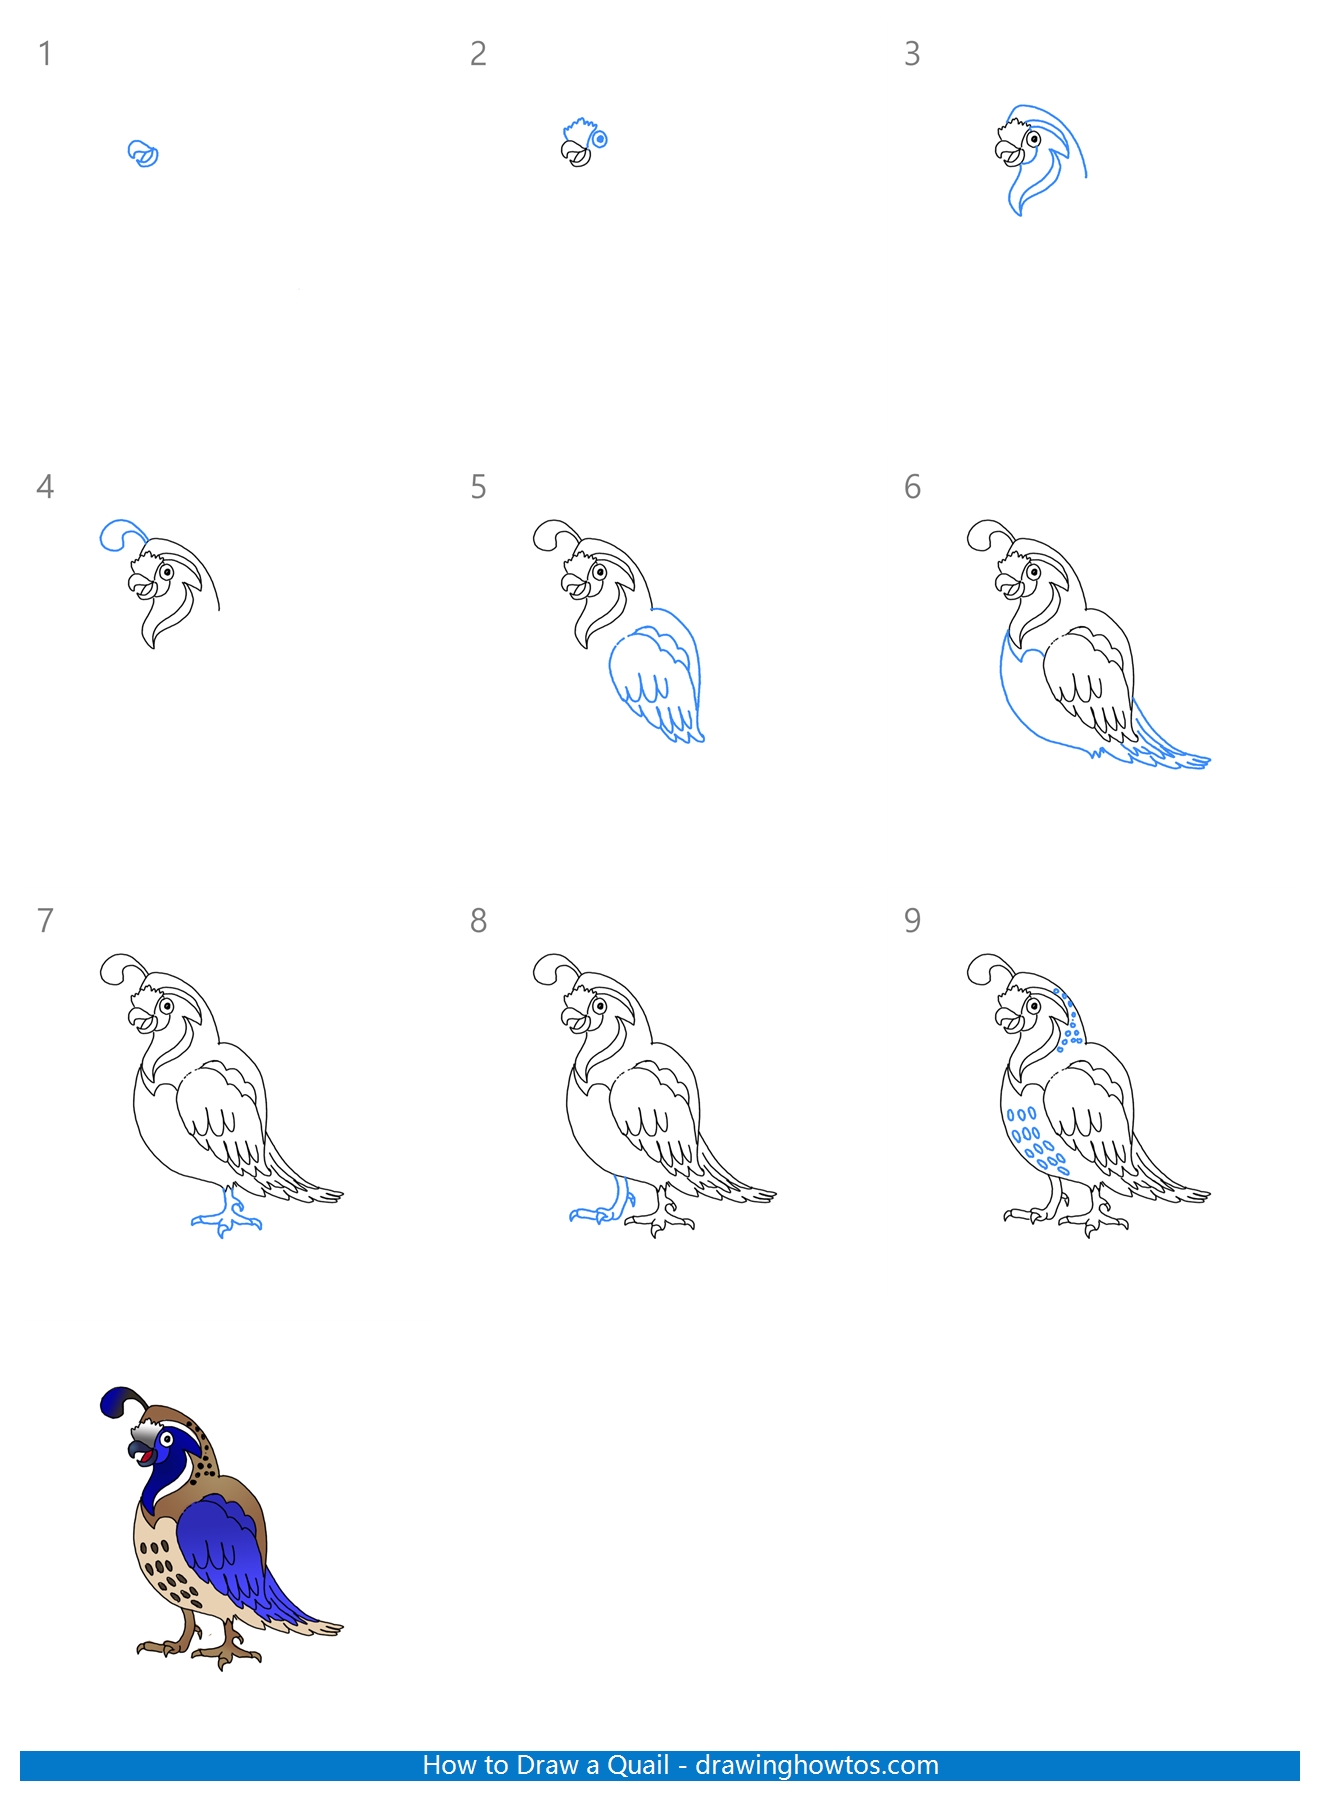 How to Draw a Quail Step by Step